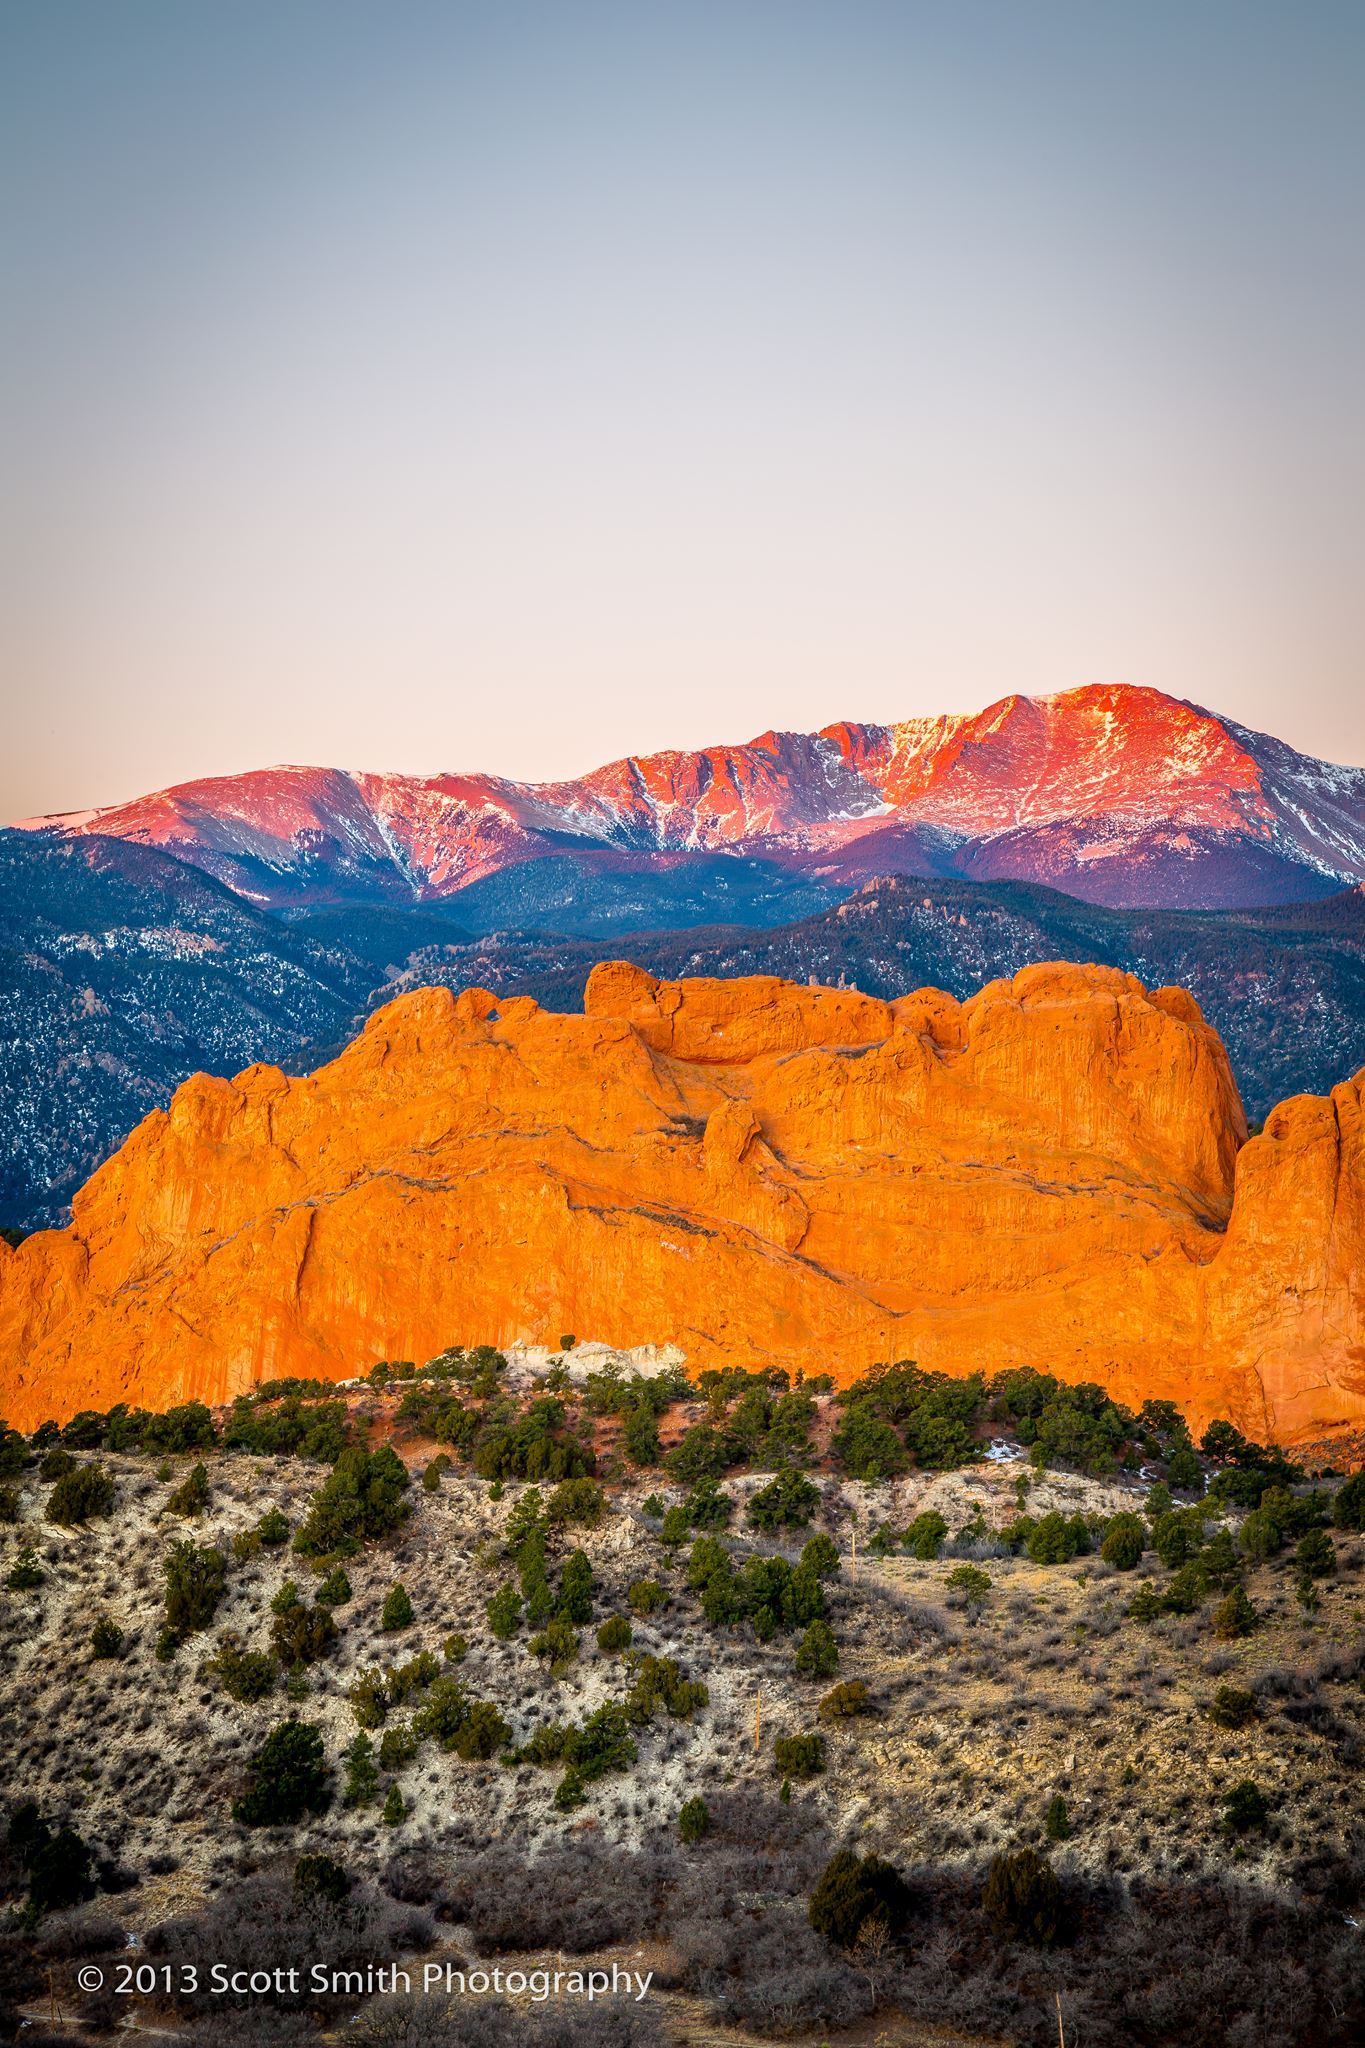 Morning Peaks - Pike's Peak, behind the Garden of the Gods, lit by the rising sun. by Scott Smith Photos